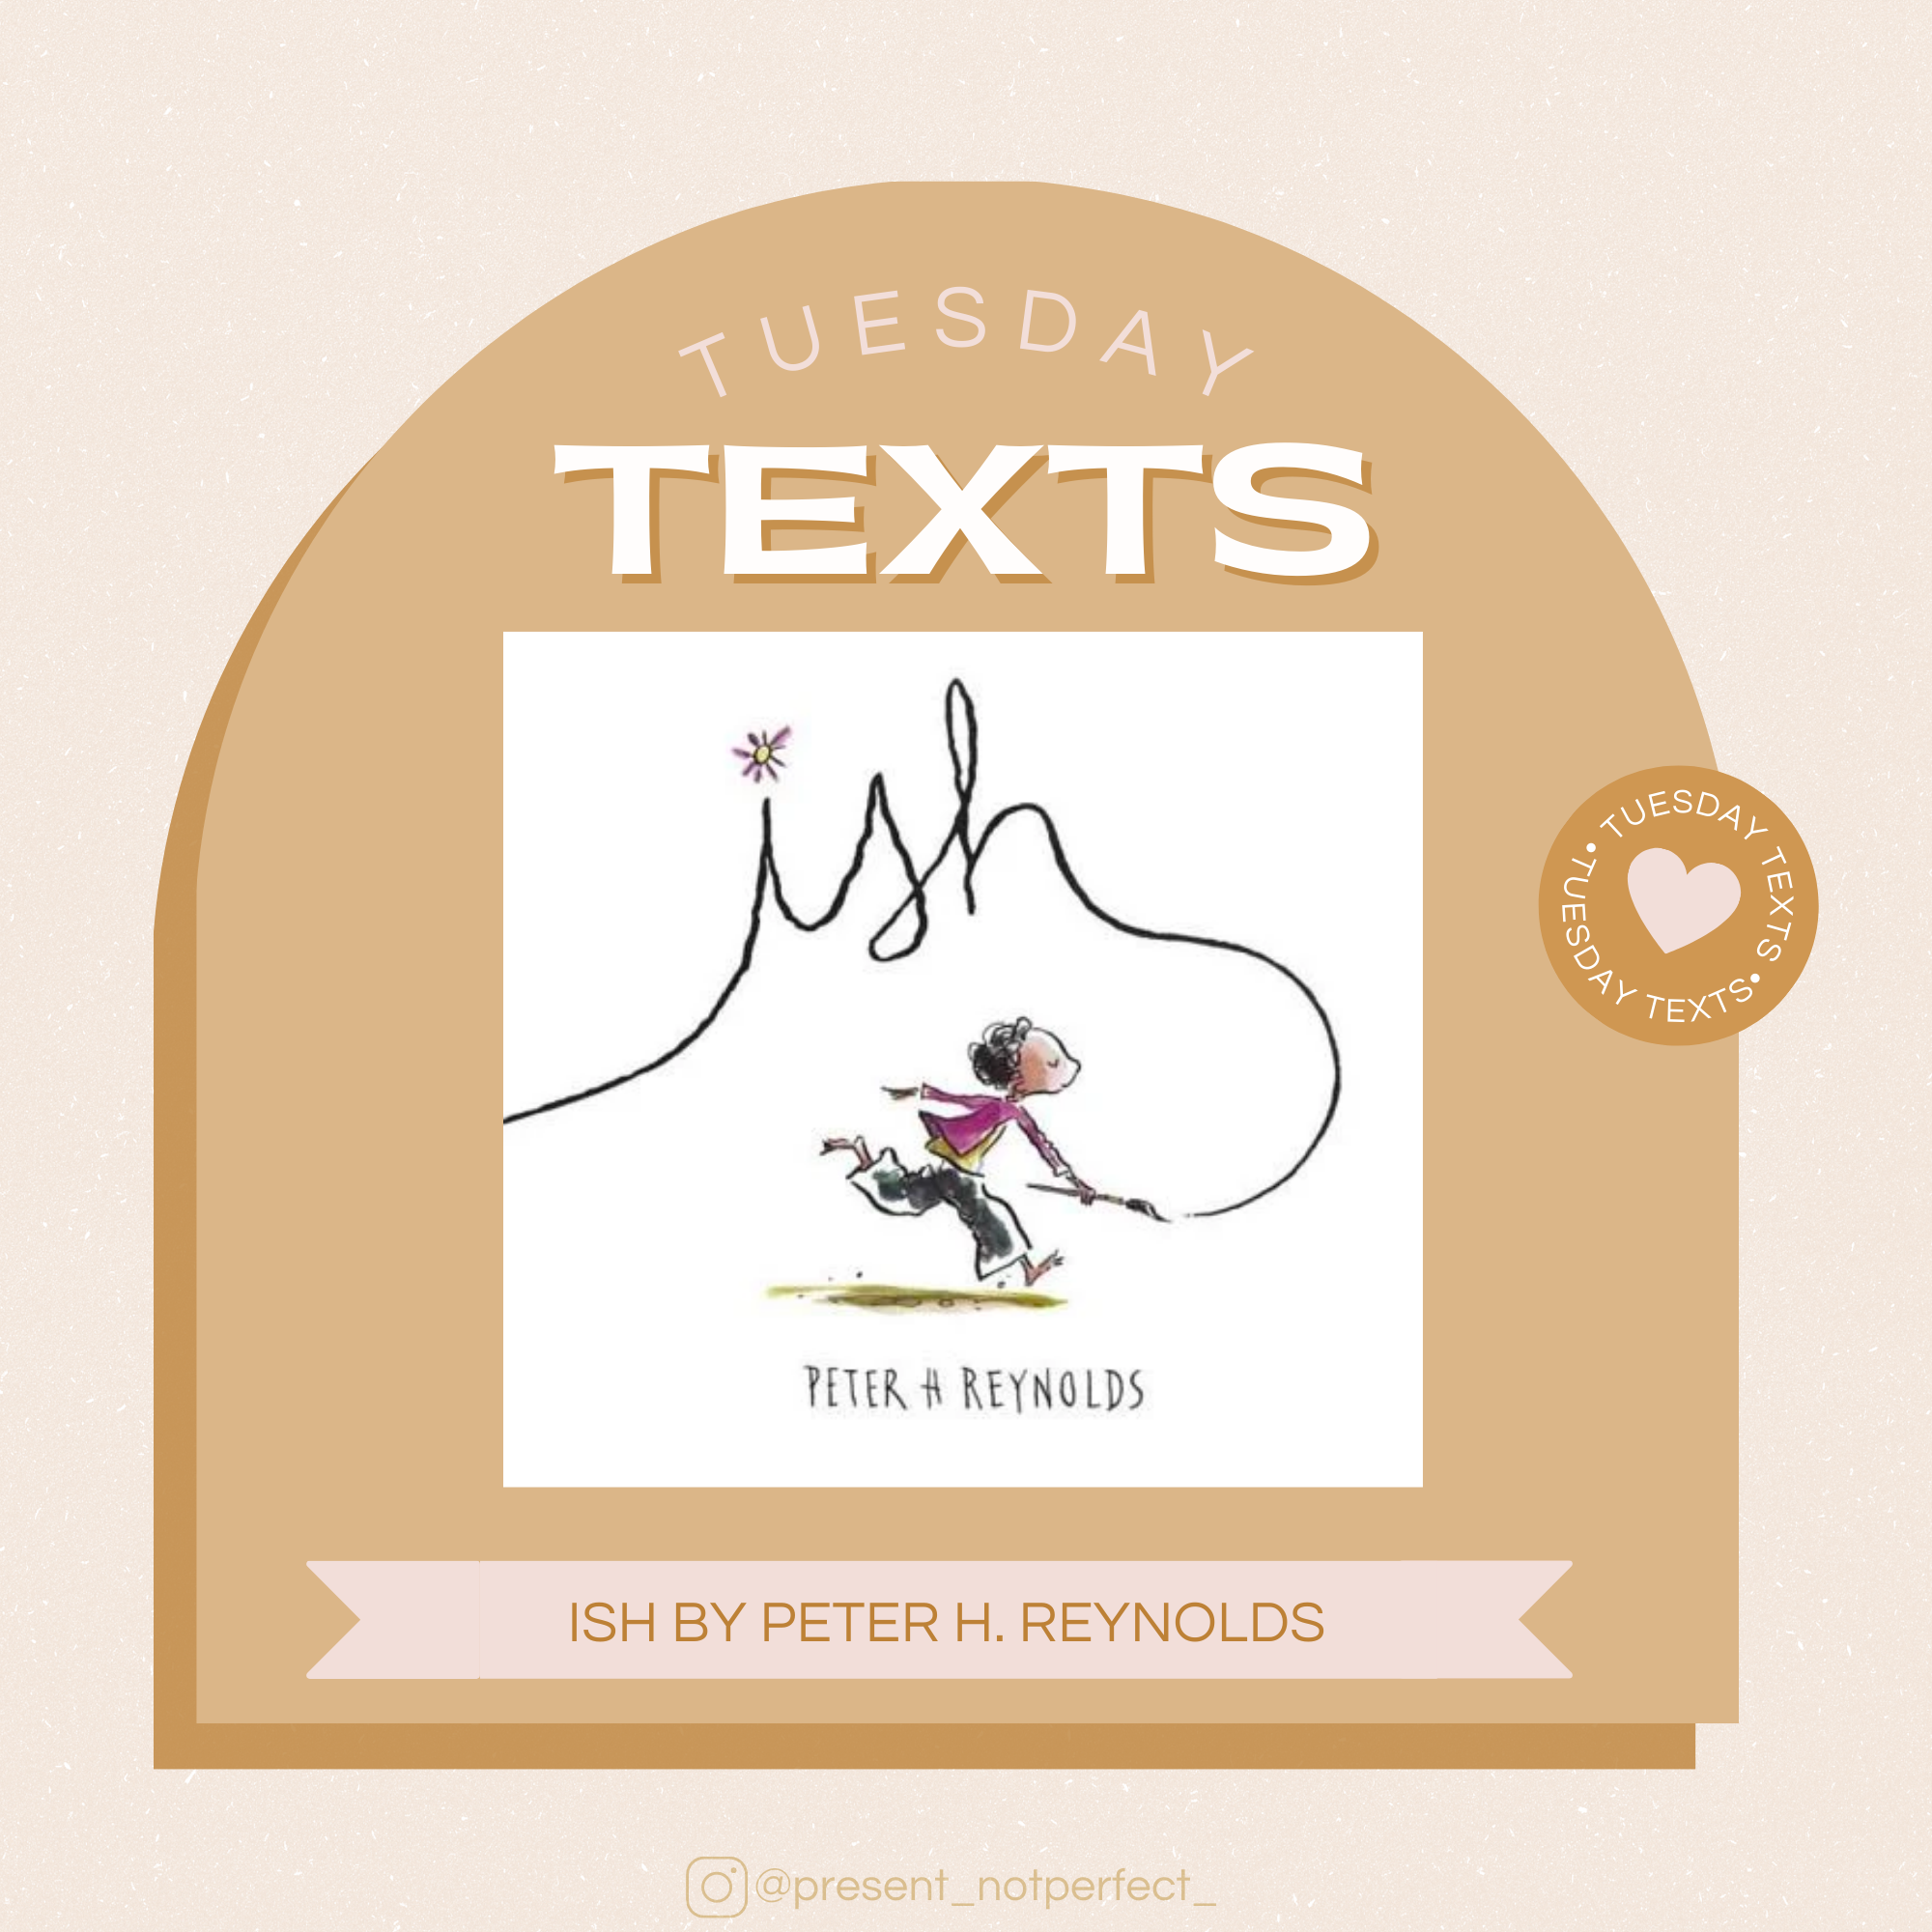 Tuesday Texts: "Ish"  by Peter H. Reynolds